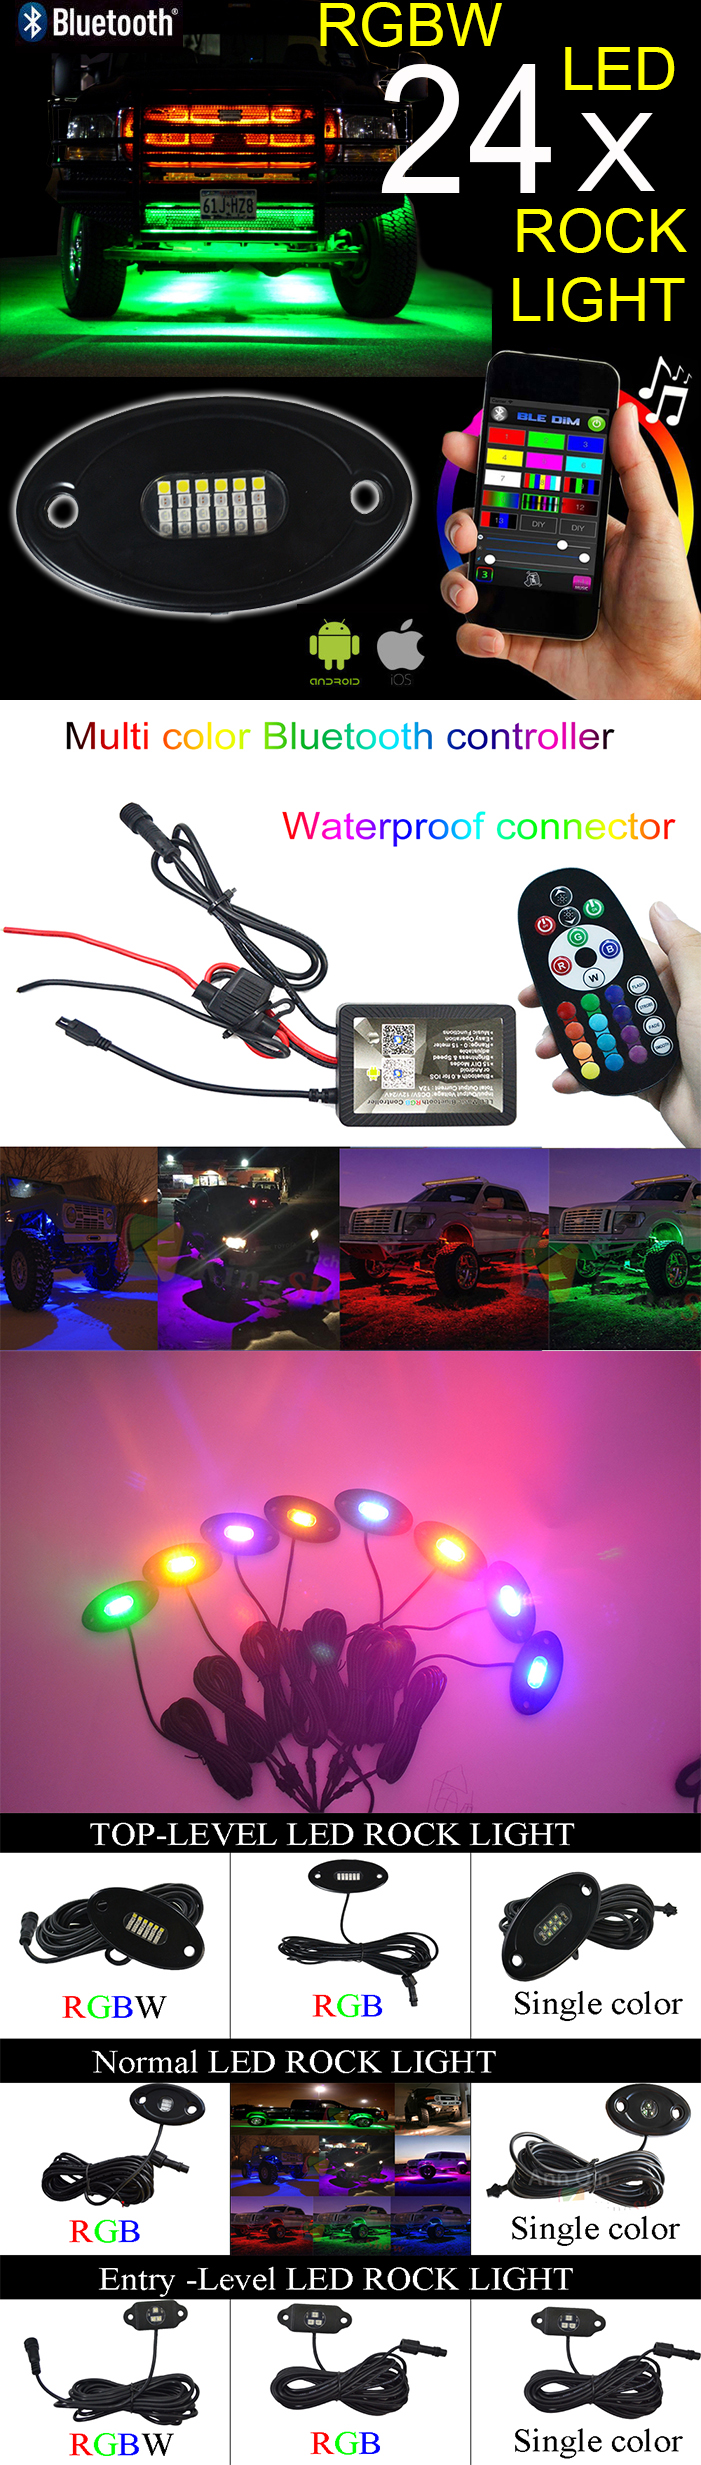 4Pods RGBW LED Rock Lights with Upgraded APP Blue-tooth Controller